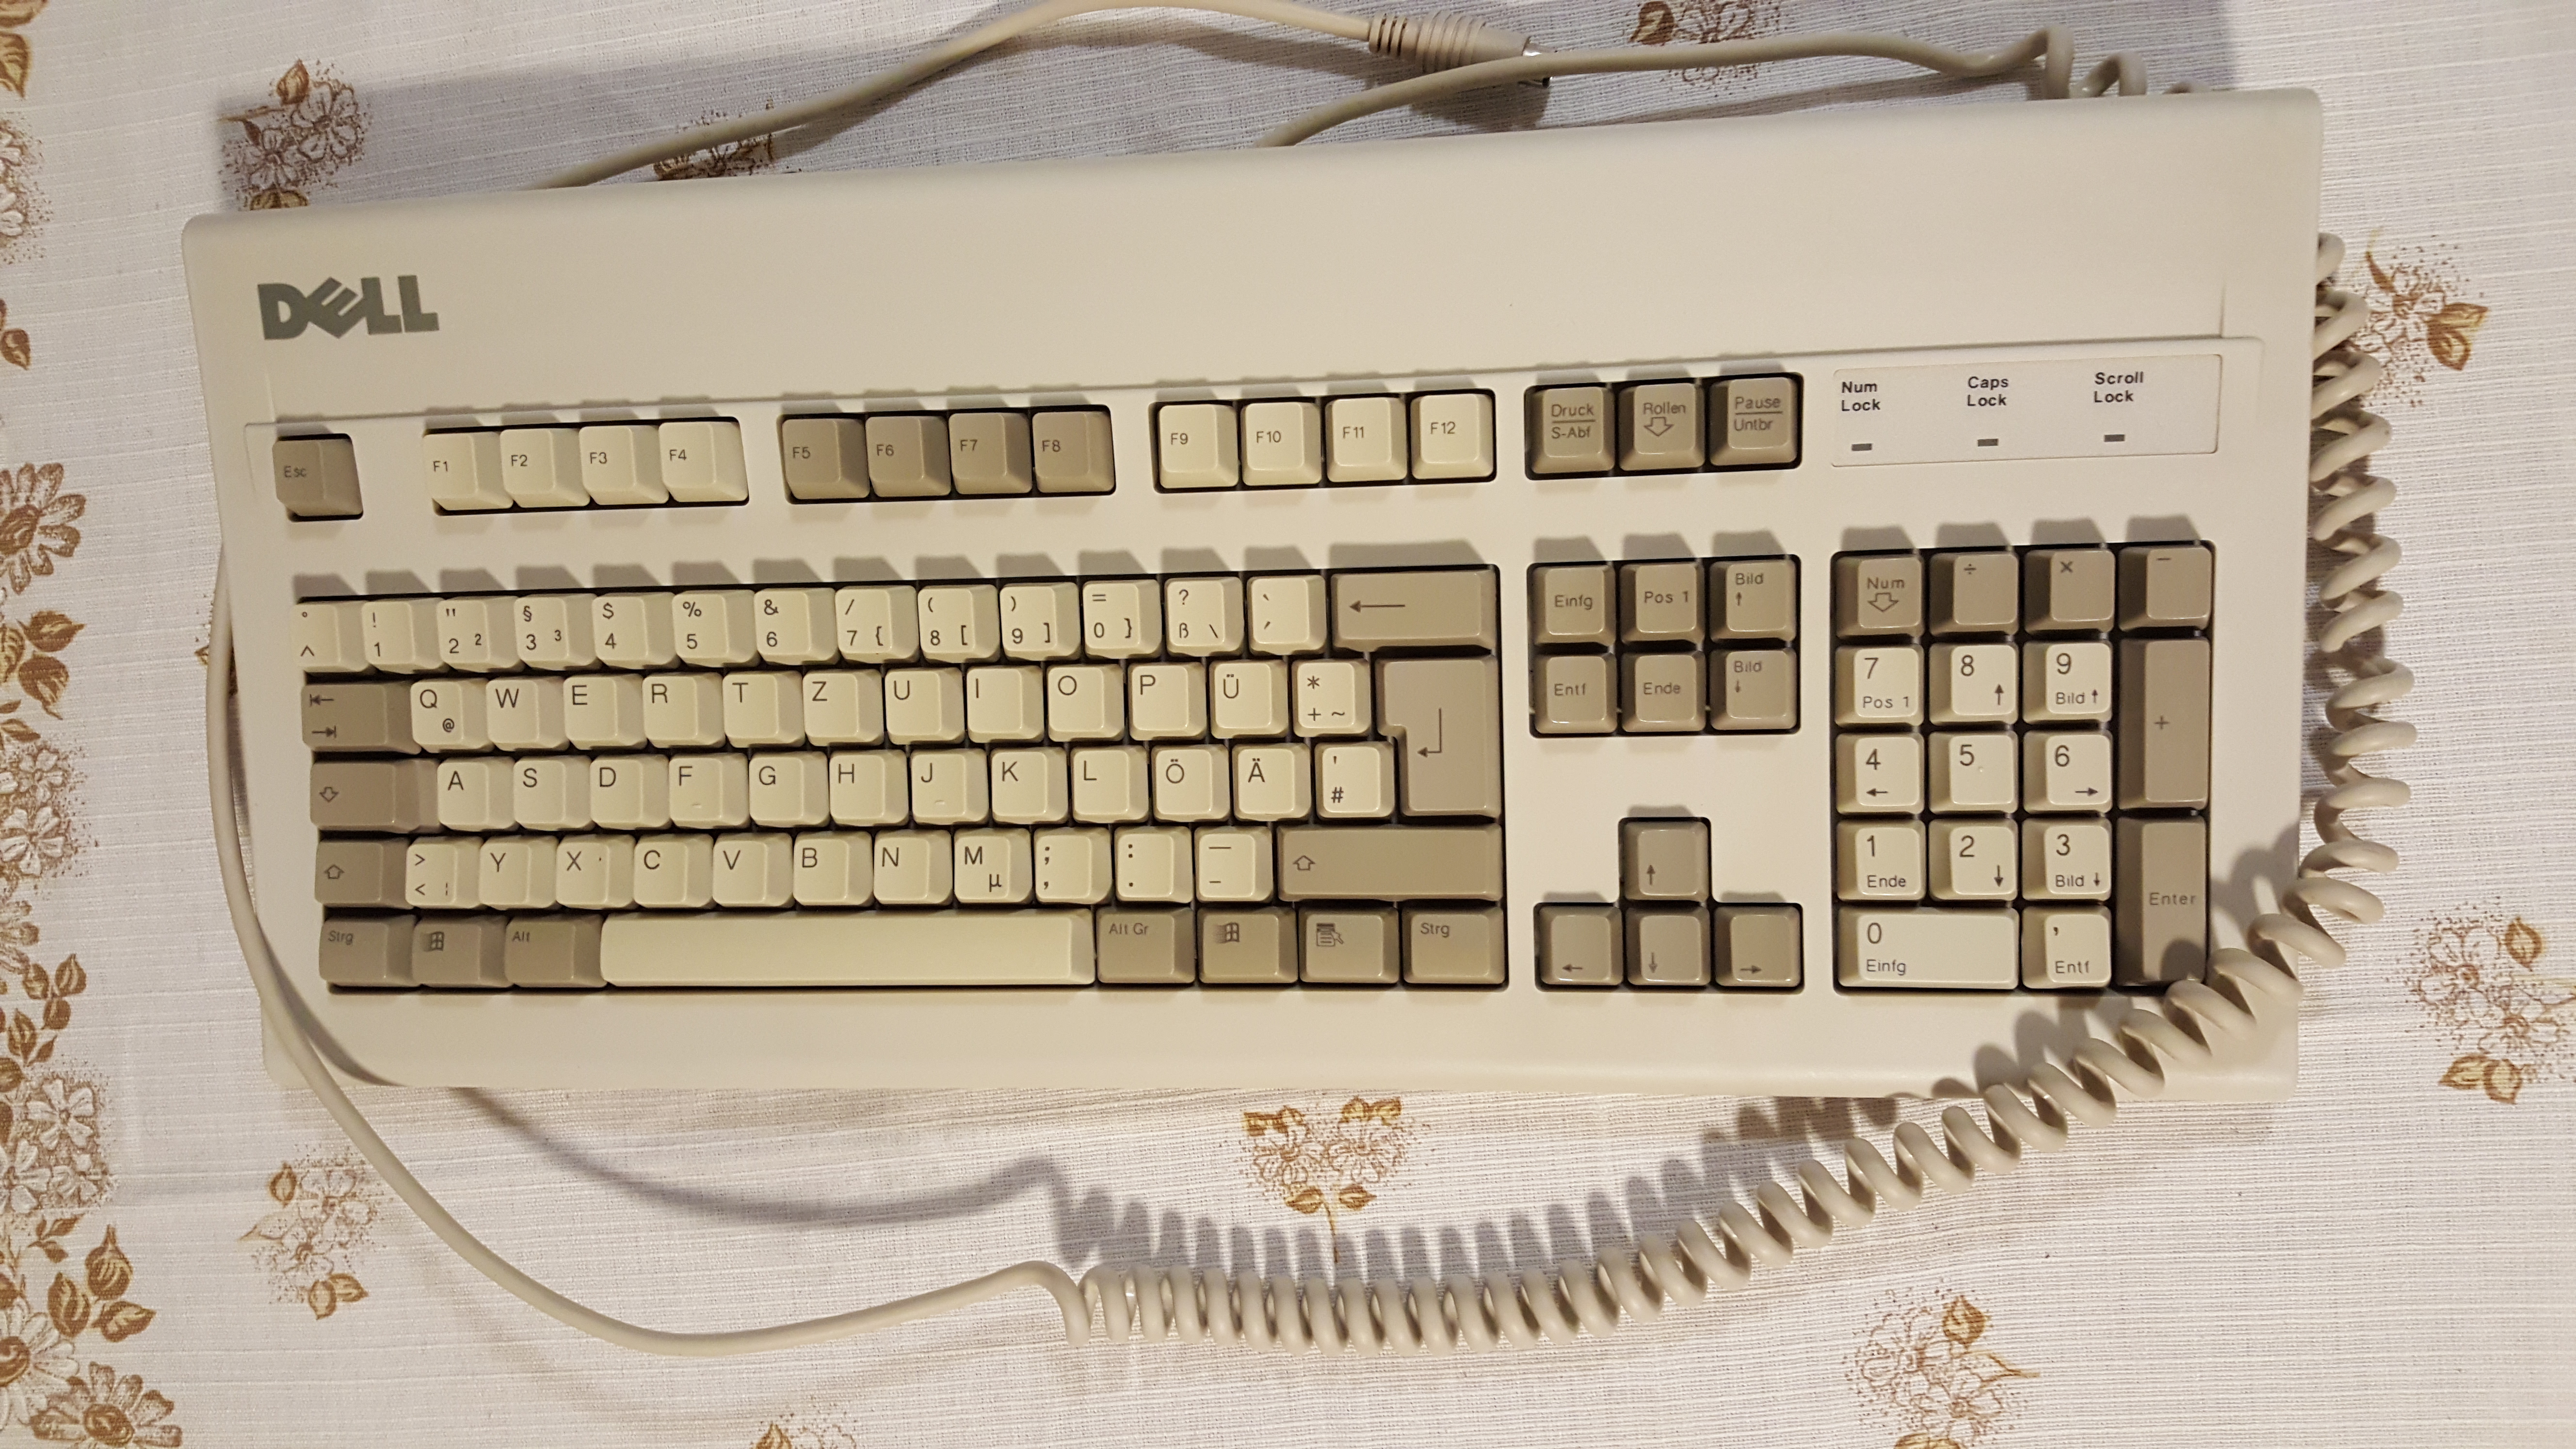 Clean from Cable to Qwertz and with a new lease on life!